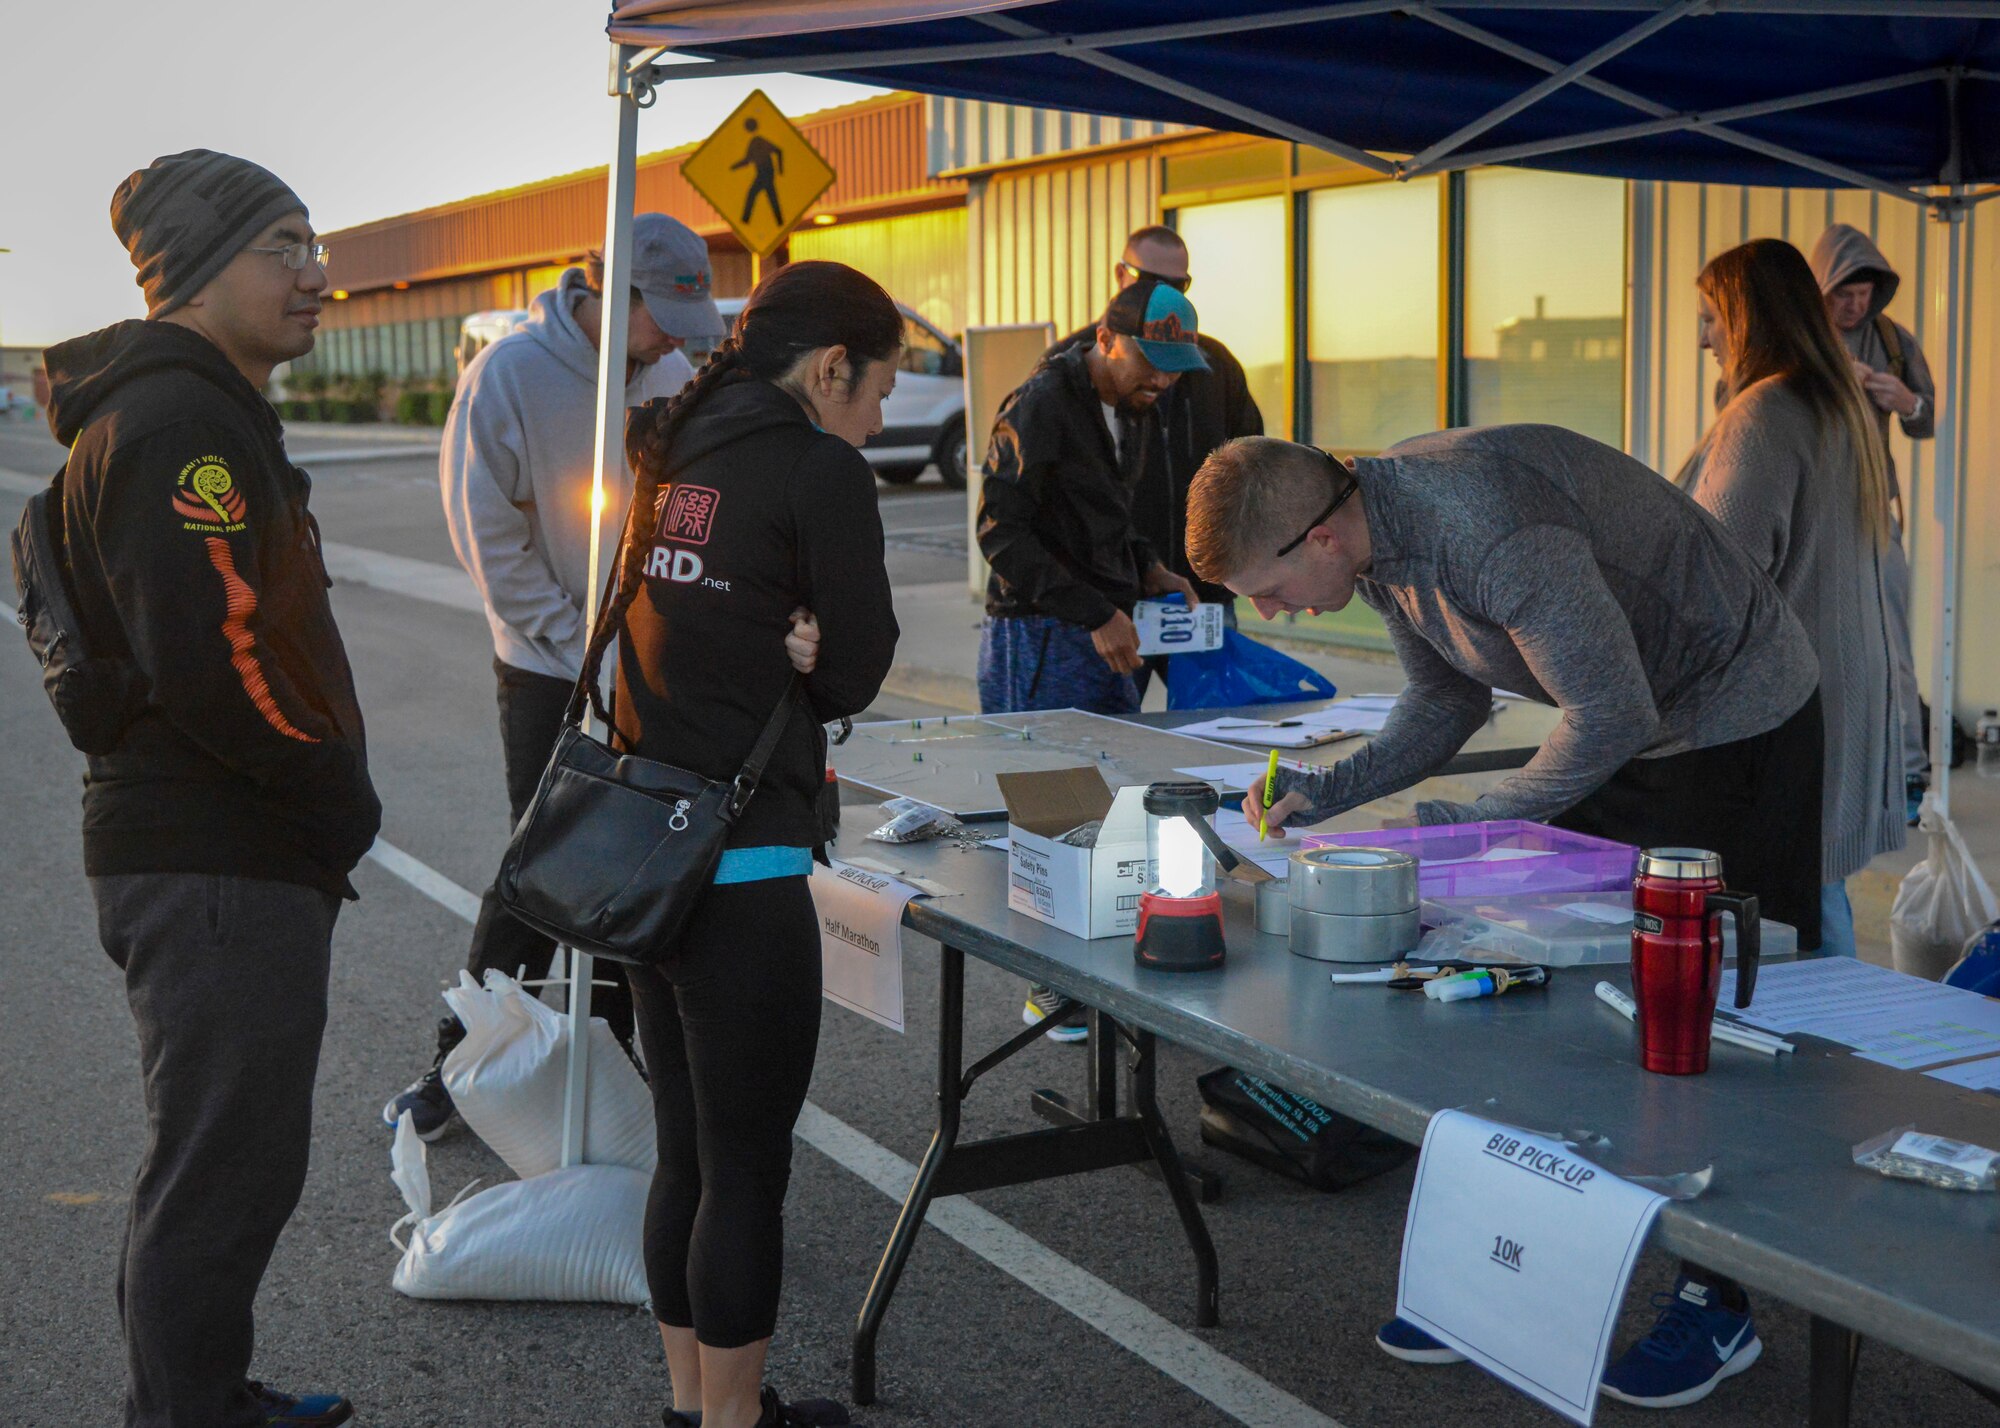 Competitors check in during the Run with History Half Marathon, 10k and 5k at Edwards Air Force Base, Calif., May 18. (U.S. Air Force photo by Giancarlo Casem)